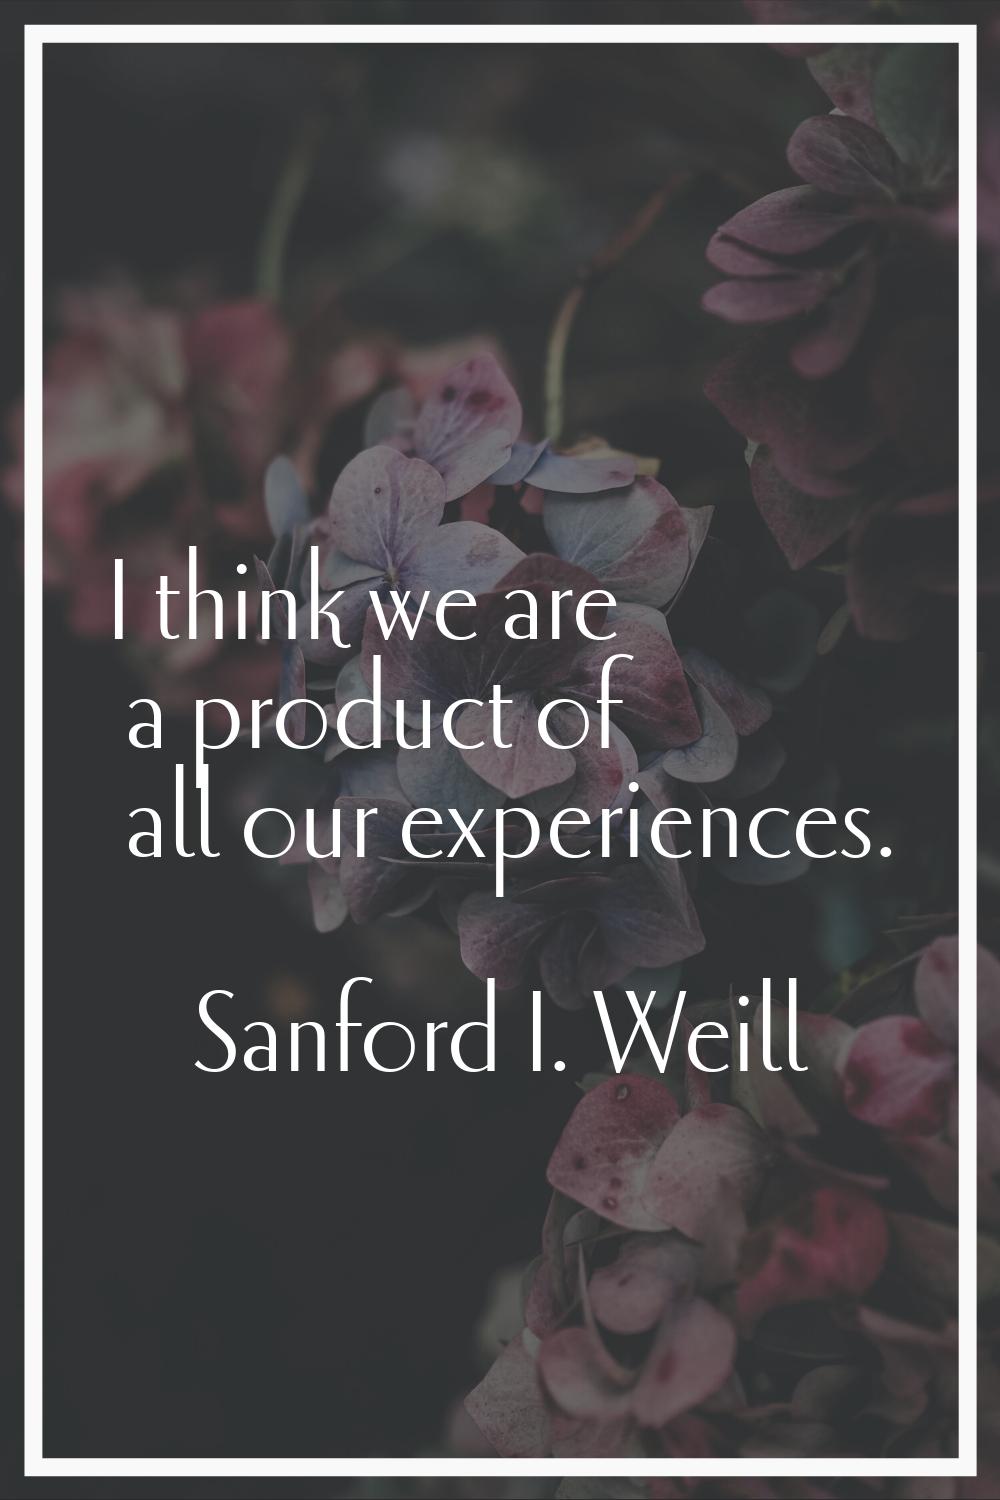 I think we are a product of all our experiences.